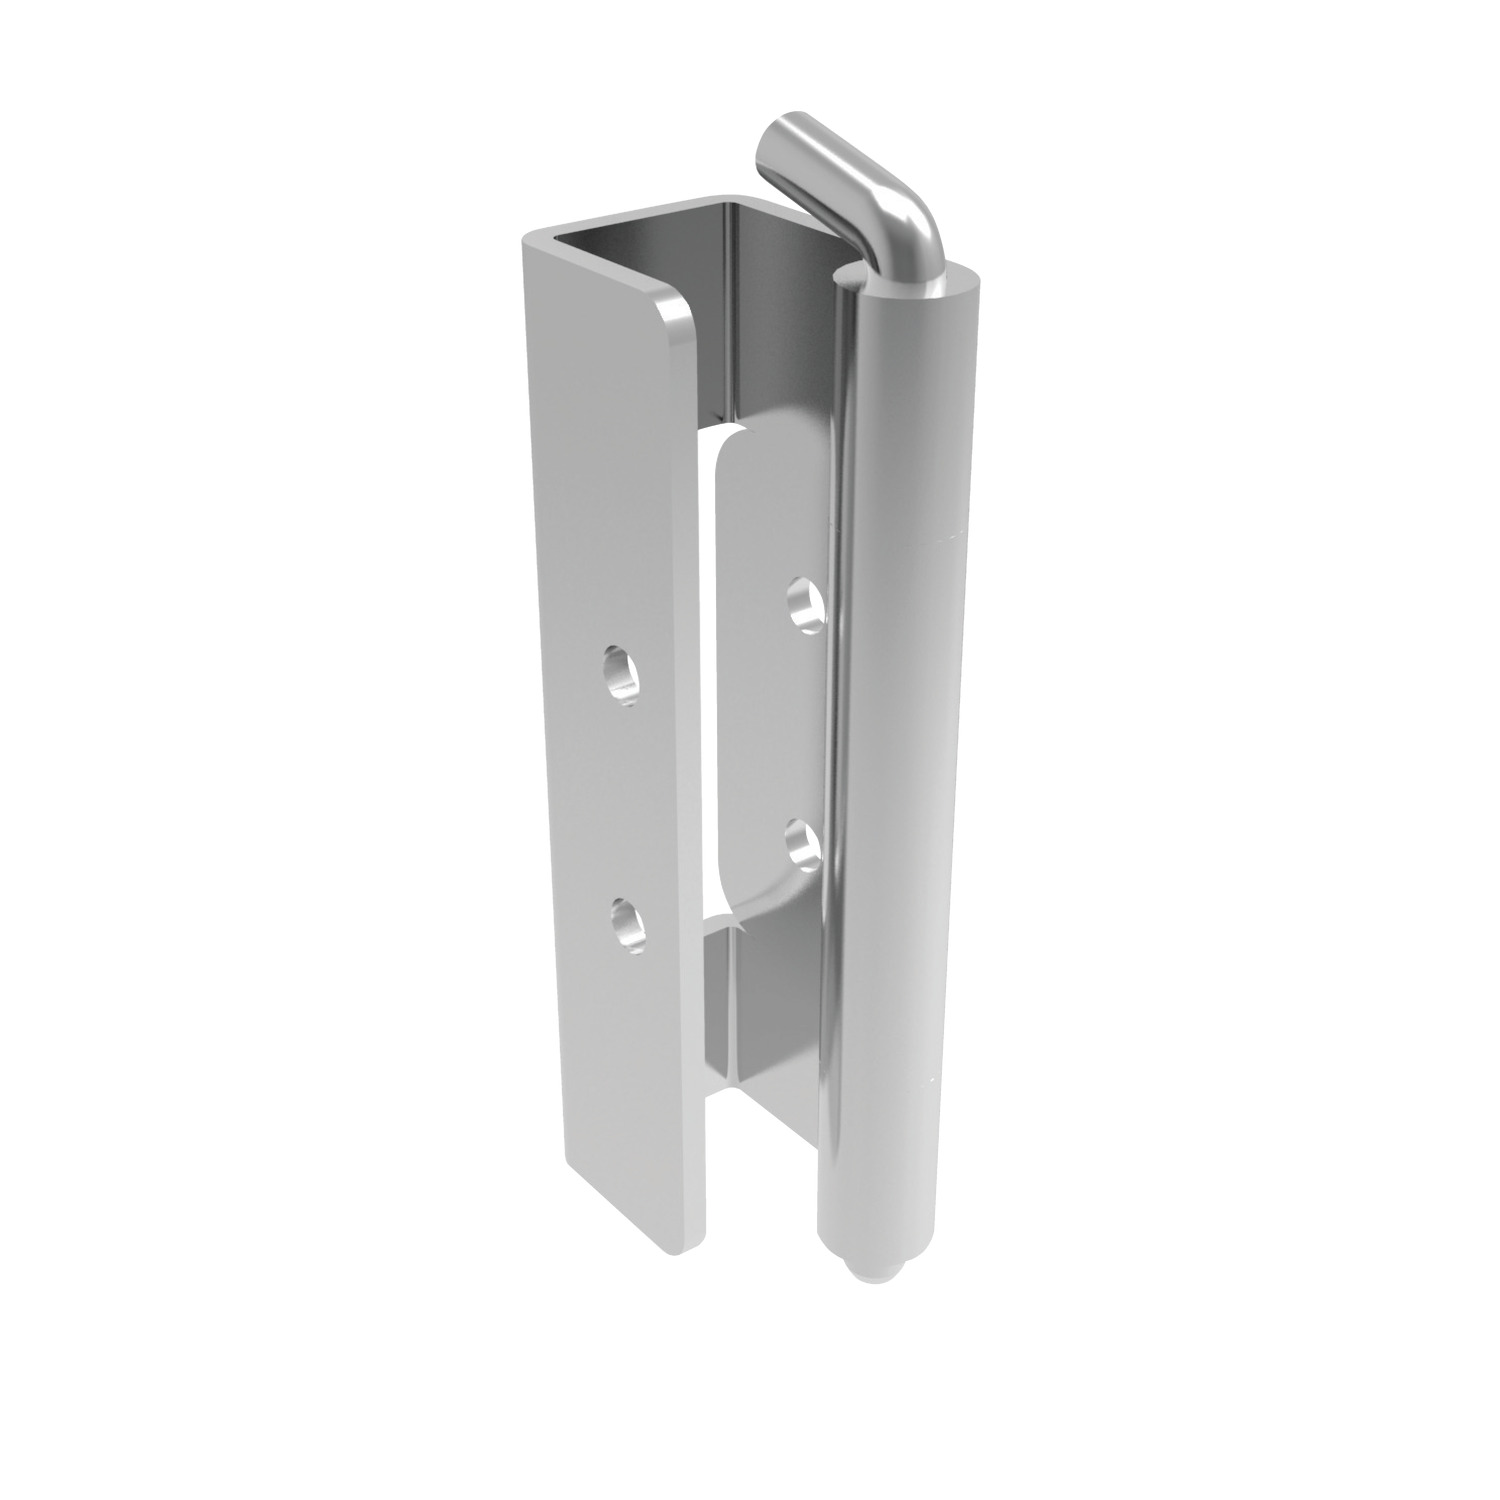 S2156.AW0023 Concealed Pivot Hinges weld and locking screw